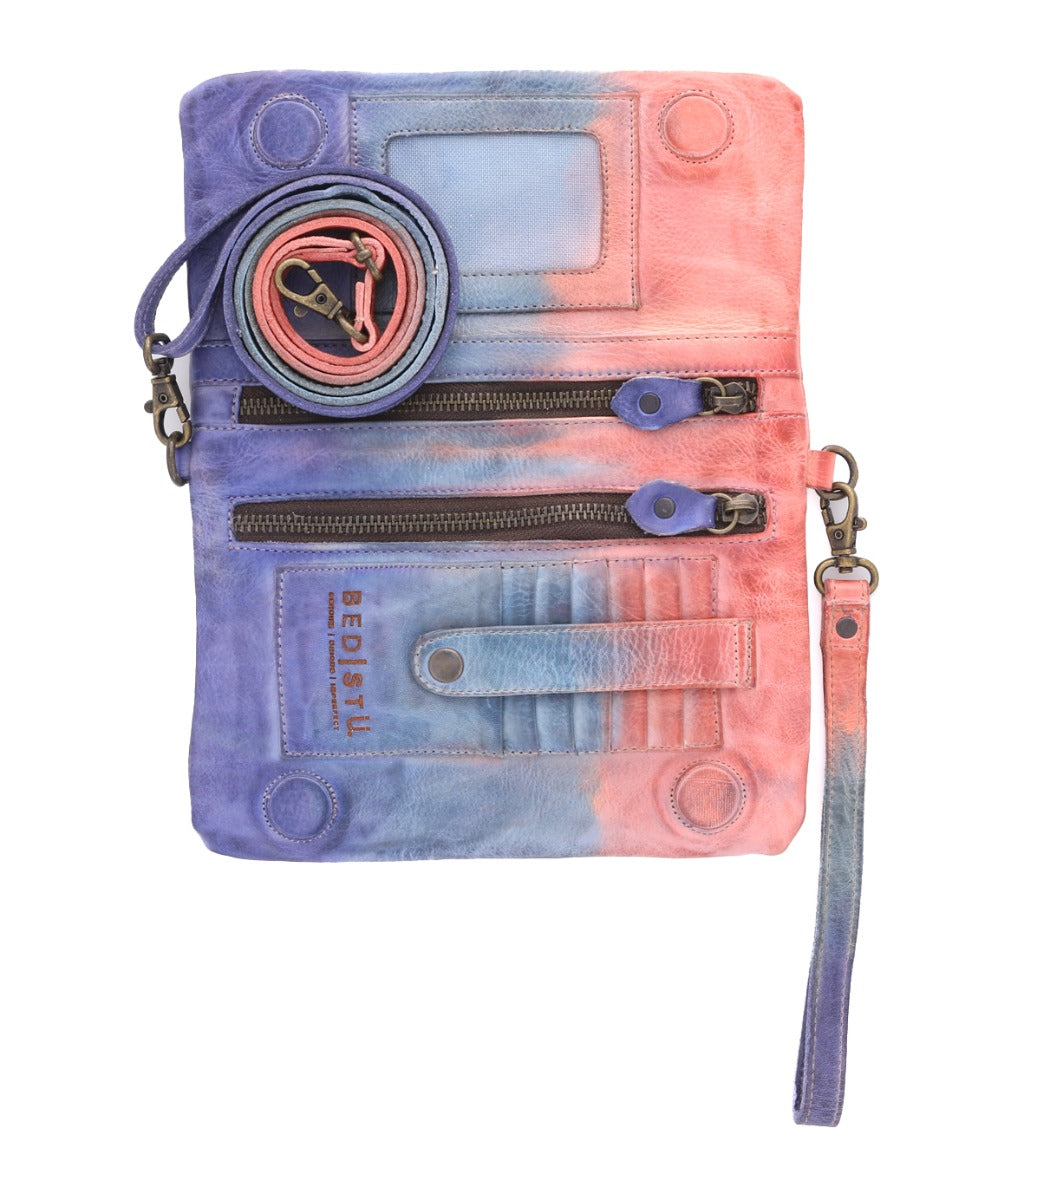 A Cadence purse with a pink and blue tie dye pattern by Bed Stu.